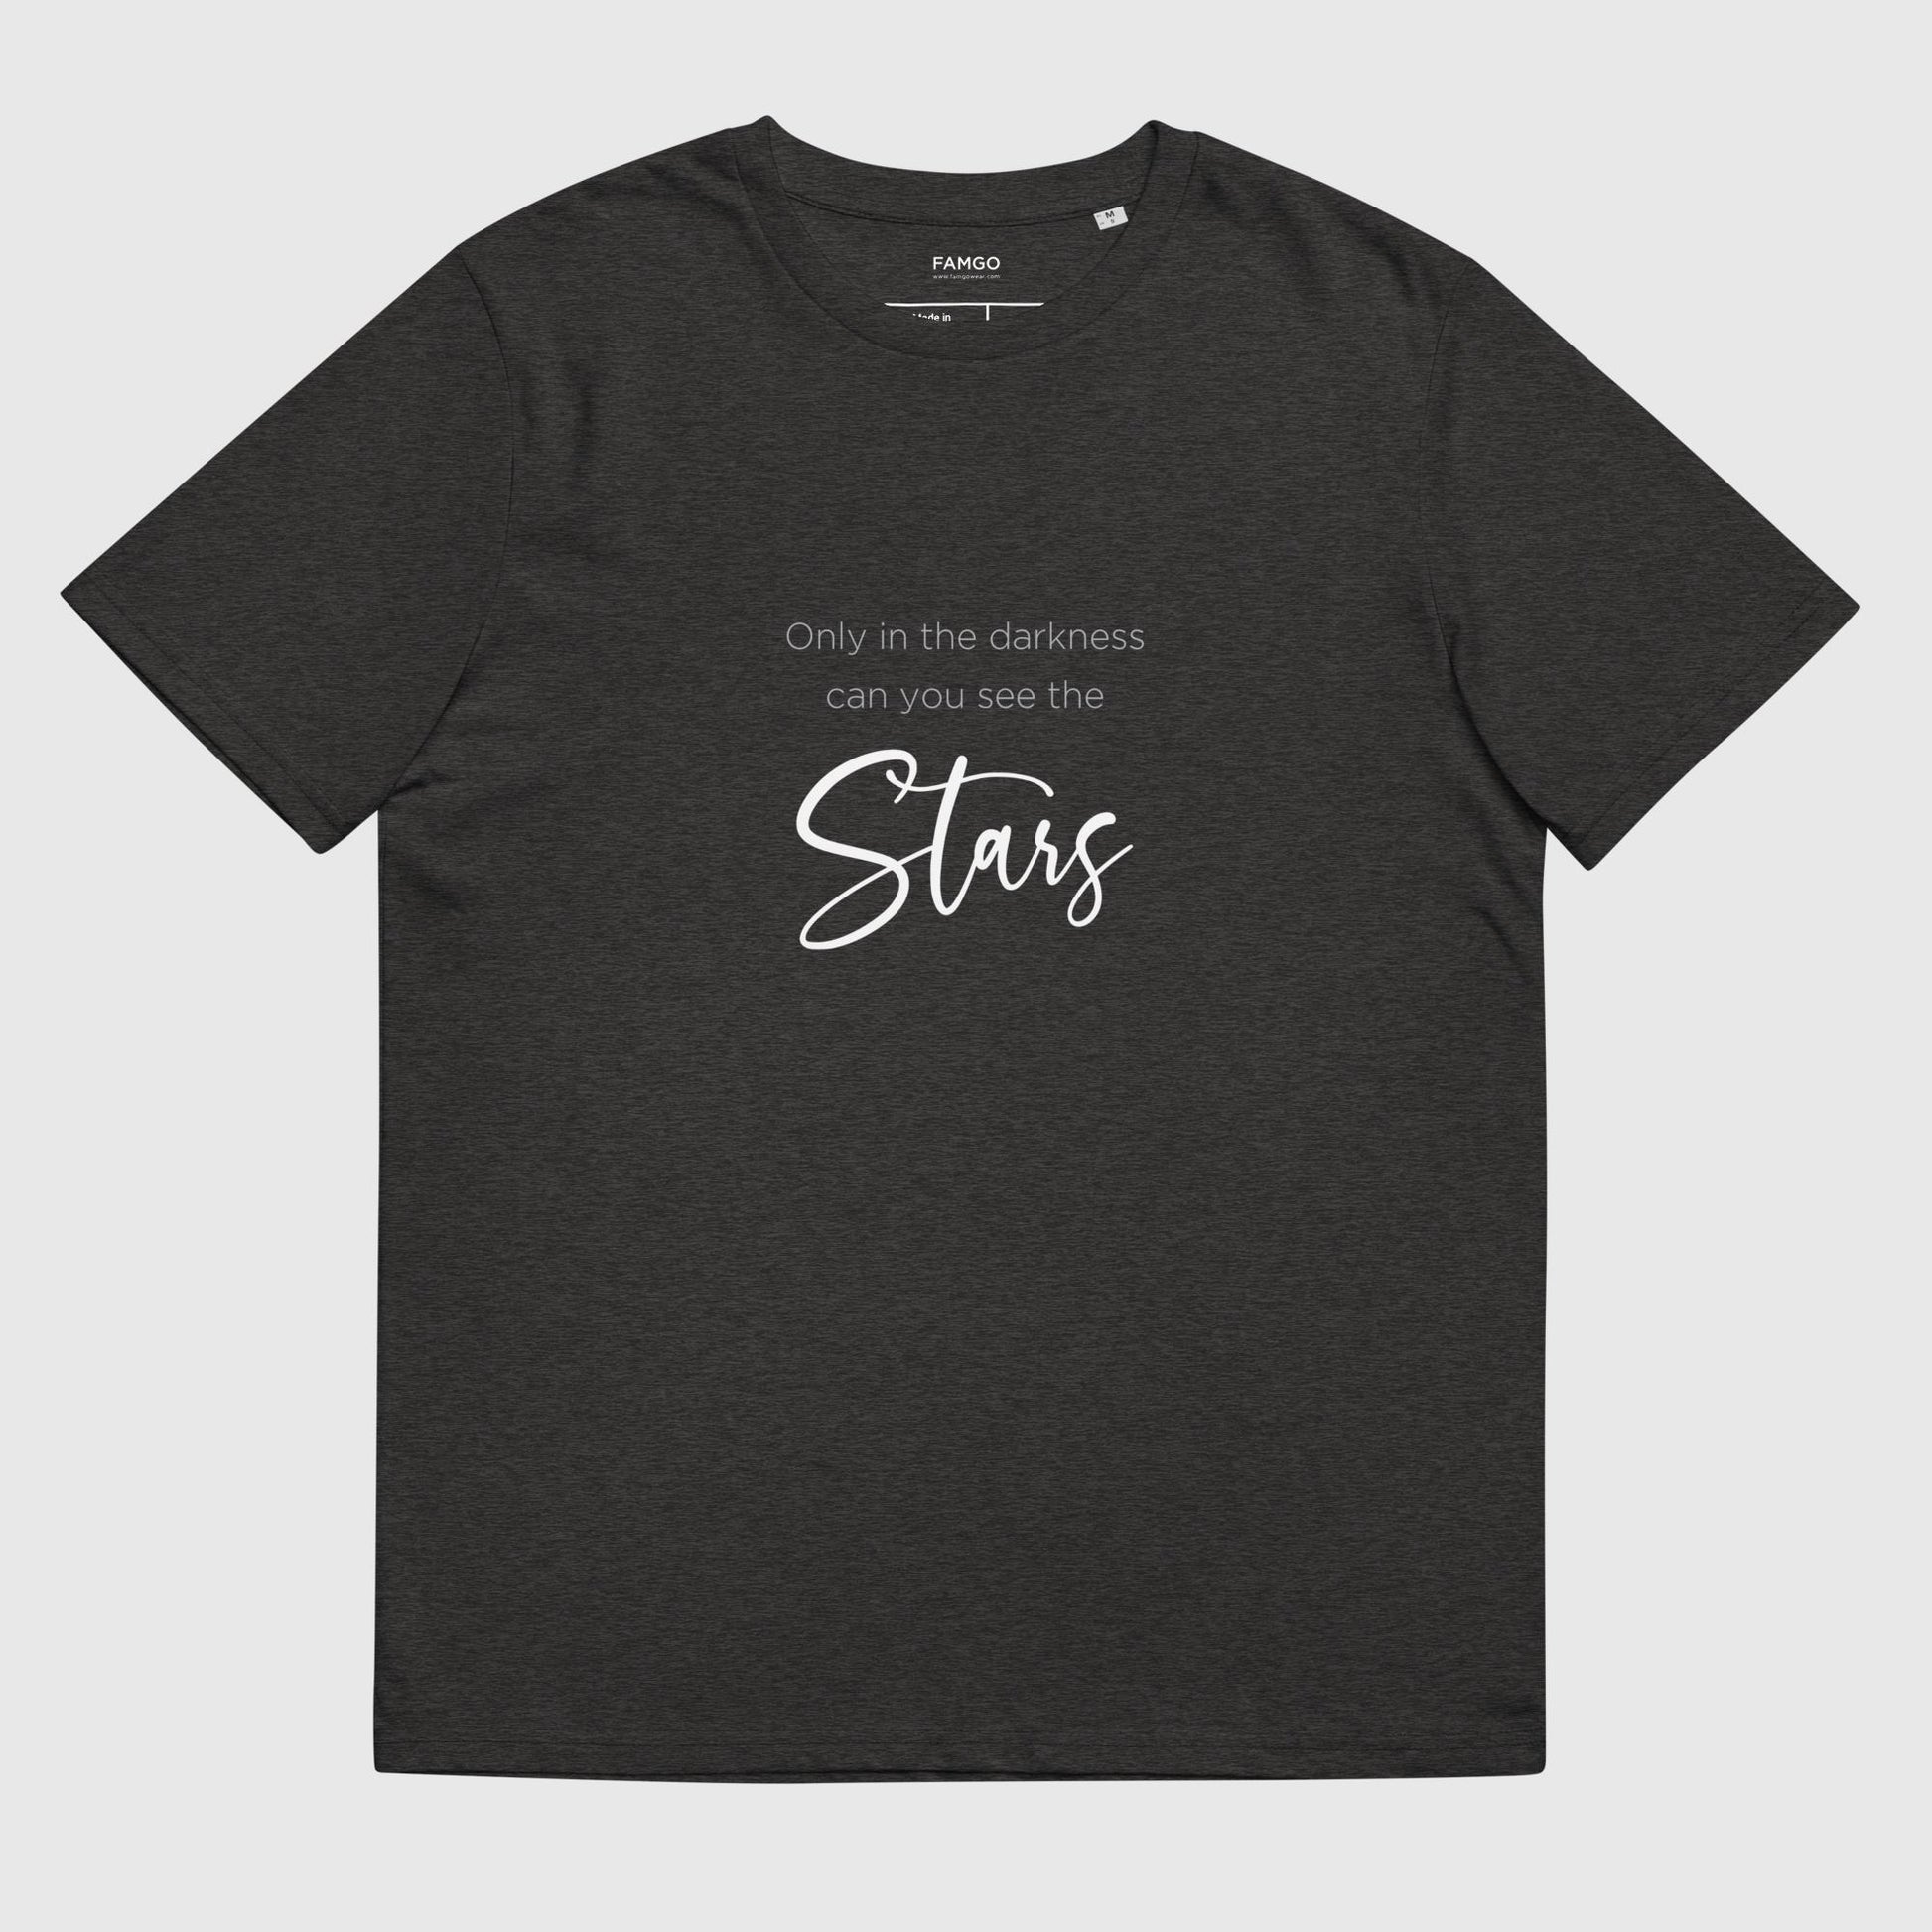 Men's dark gray organic cotton t-shirt that features Dr. Martin Luther King Jr's inspirational quote, "Only In The Darkness Can You See The Stars."